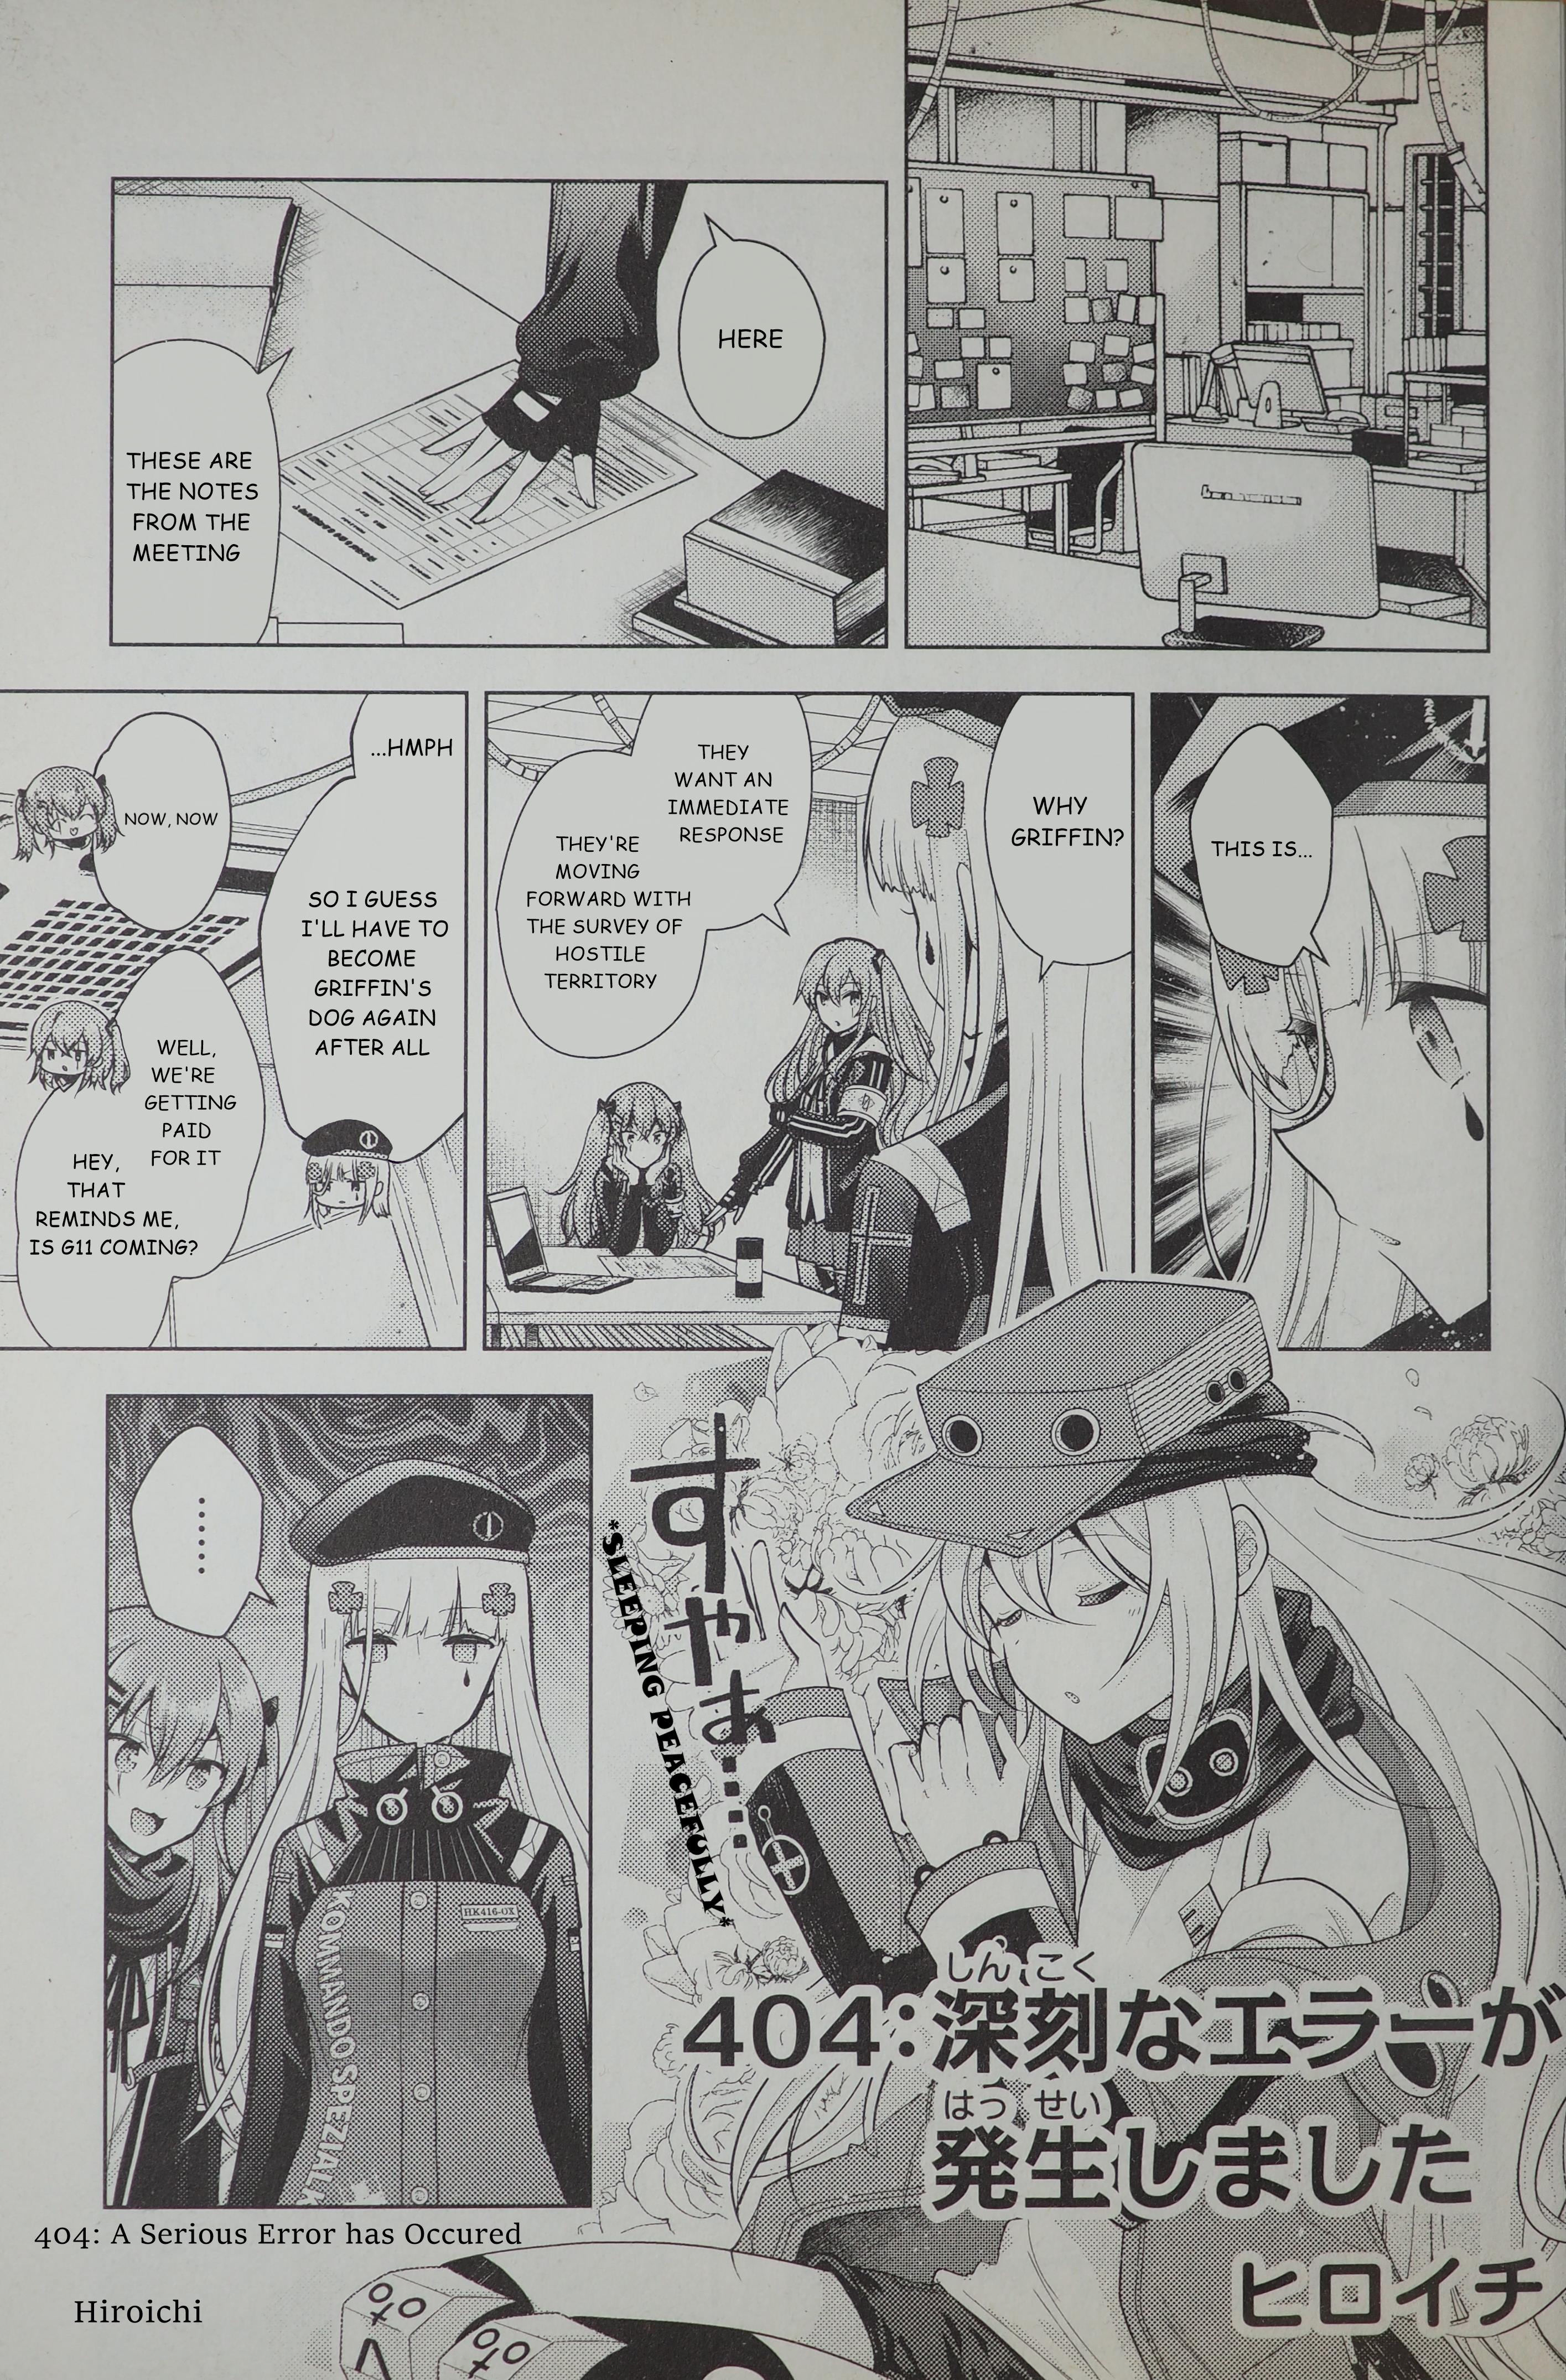 Dolls Frontline Comic Anthology - DNA Media 2019 - Chapter 12837 - 404 - A Serious Error Has Occurred - Image 1